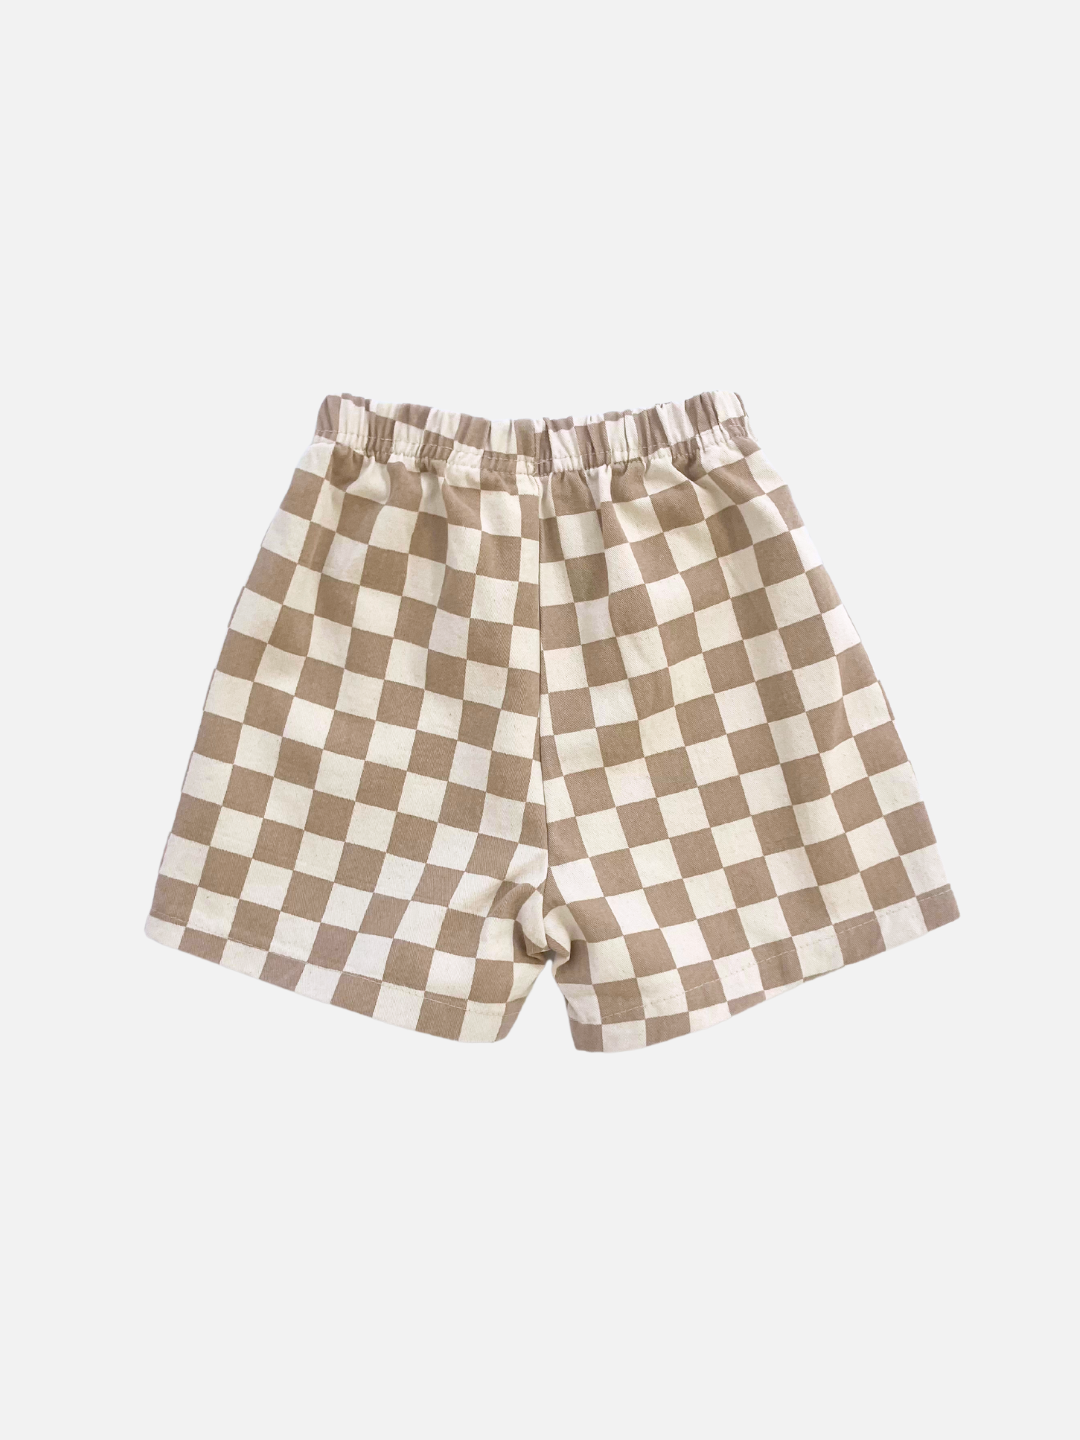 A back view of the kid's Frankie Short in Tan & Ivory check